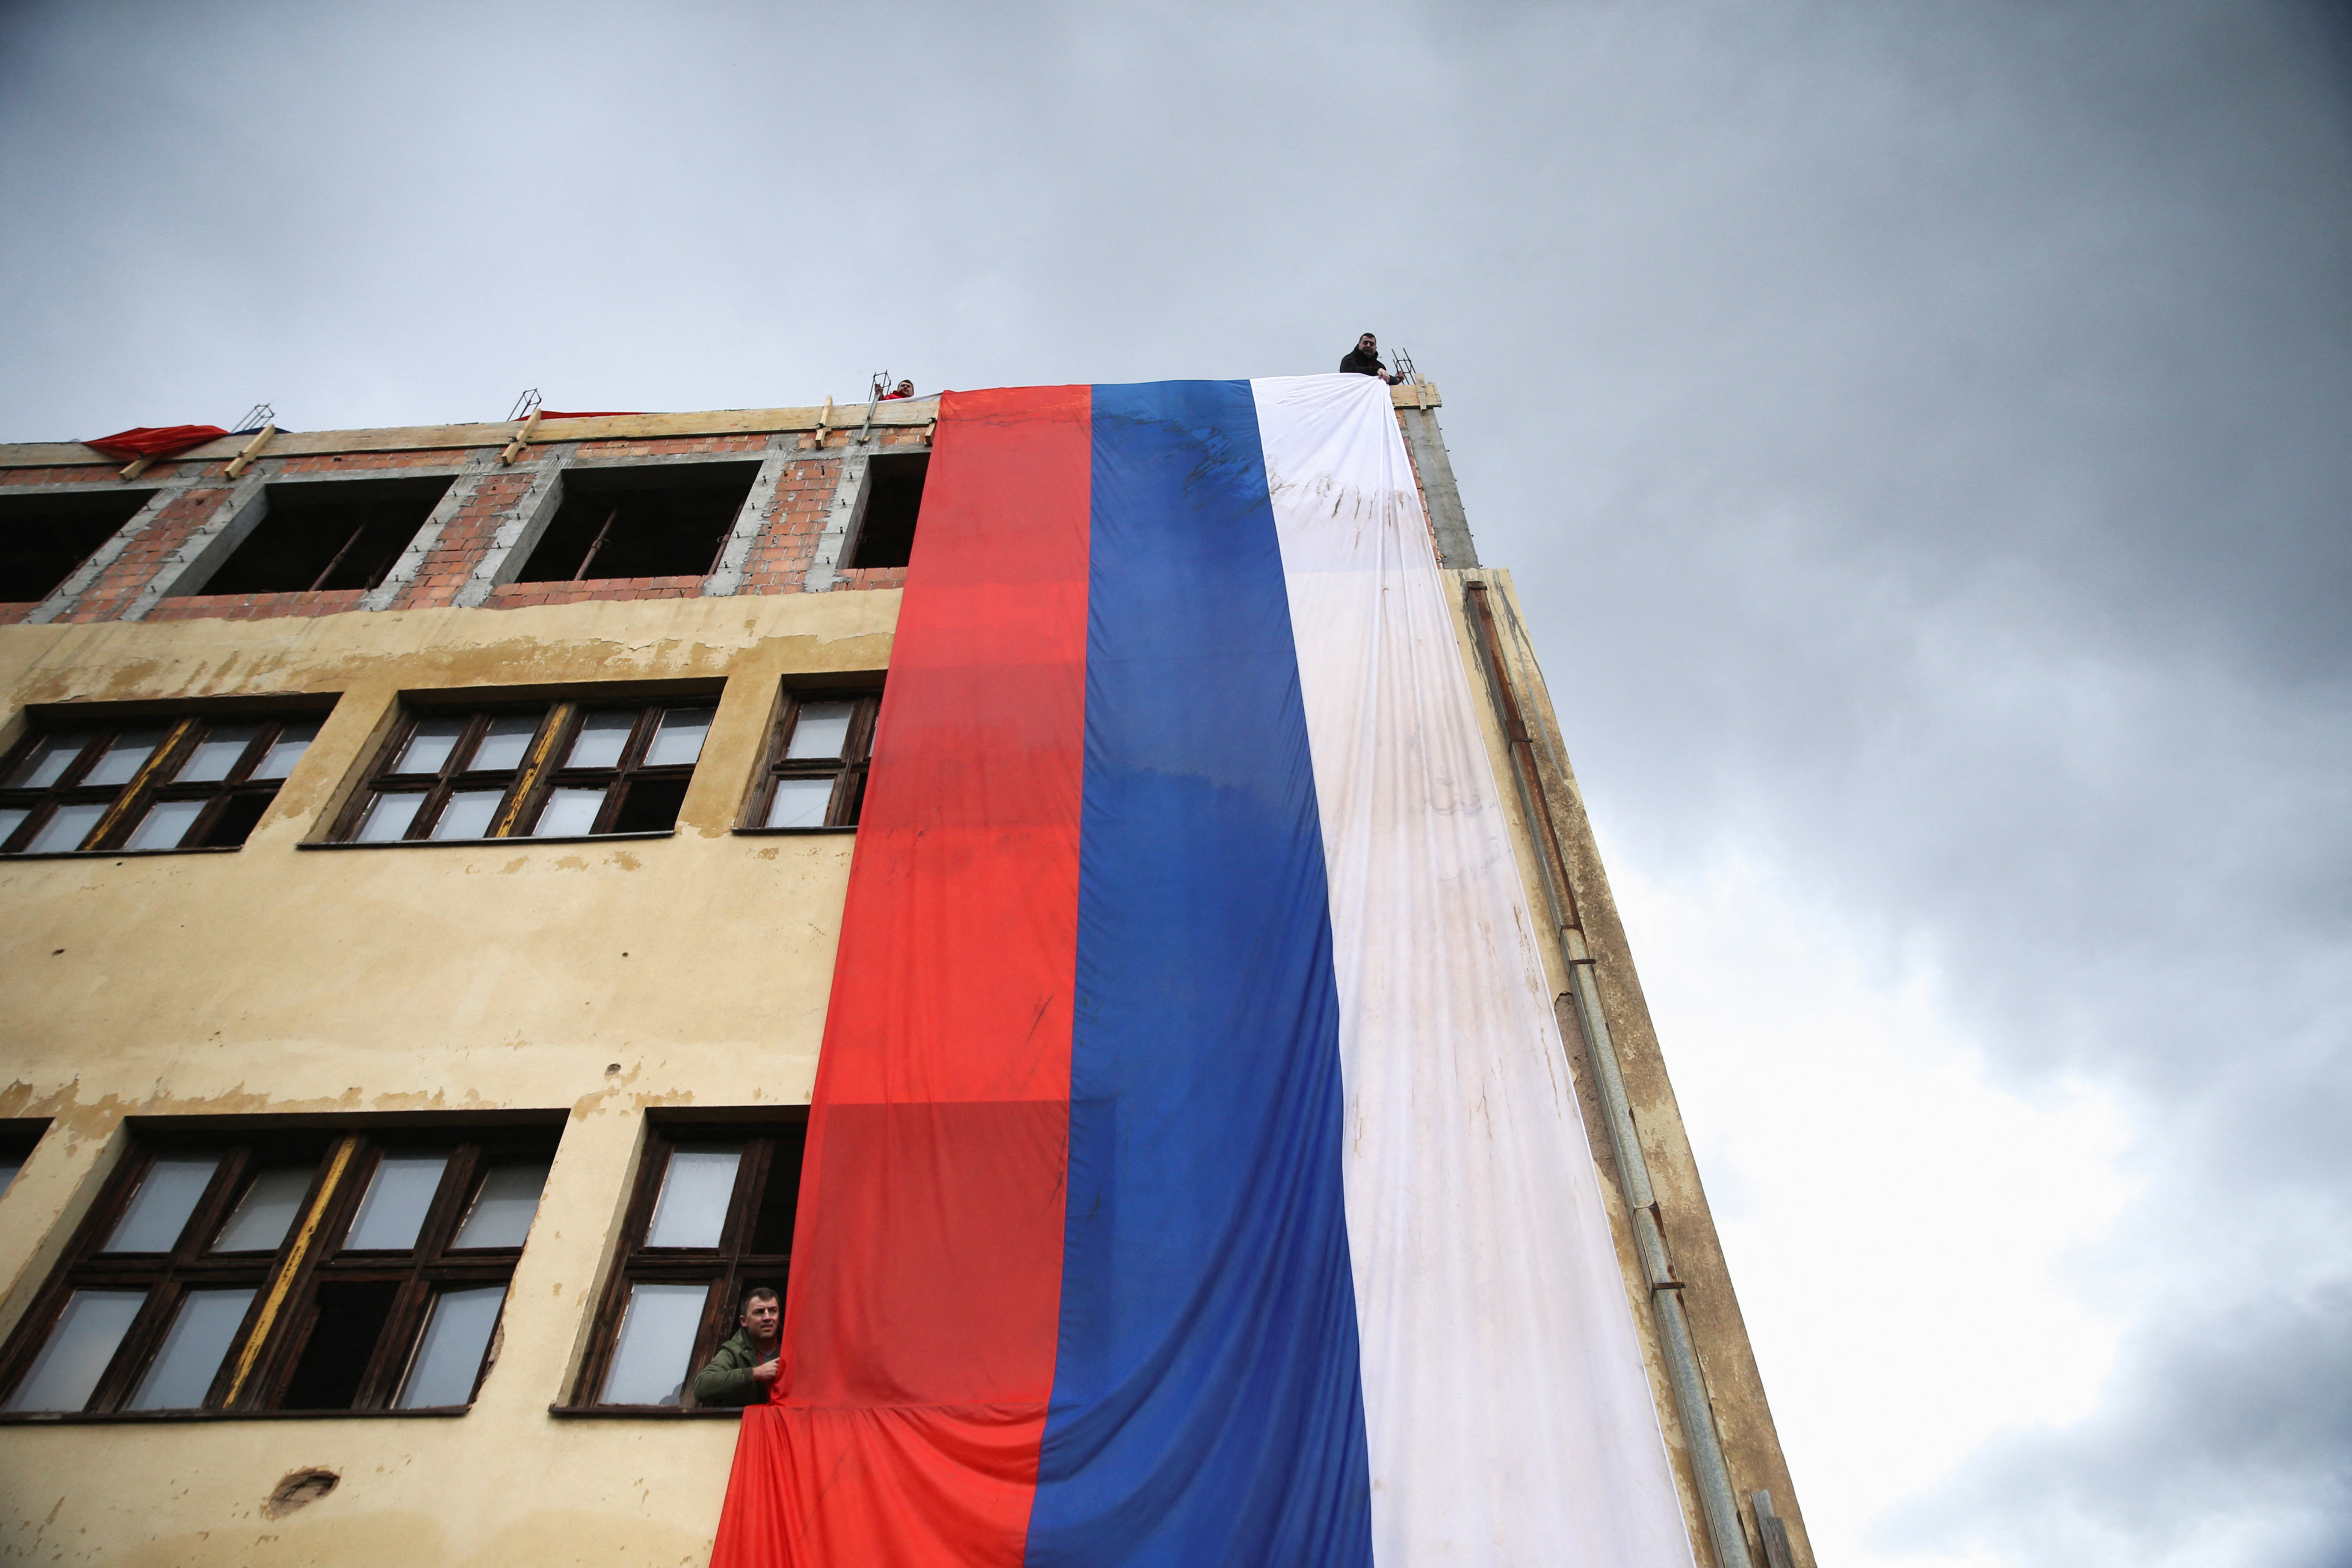 Bosnian Serbs celebrate Serb Republic national holiday, banned by court, in East Sarajevo